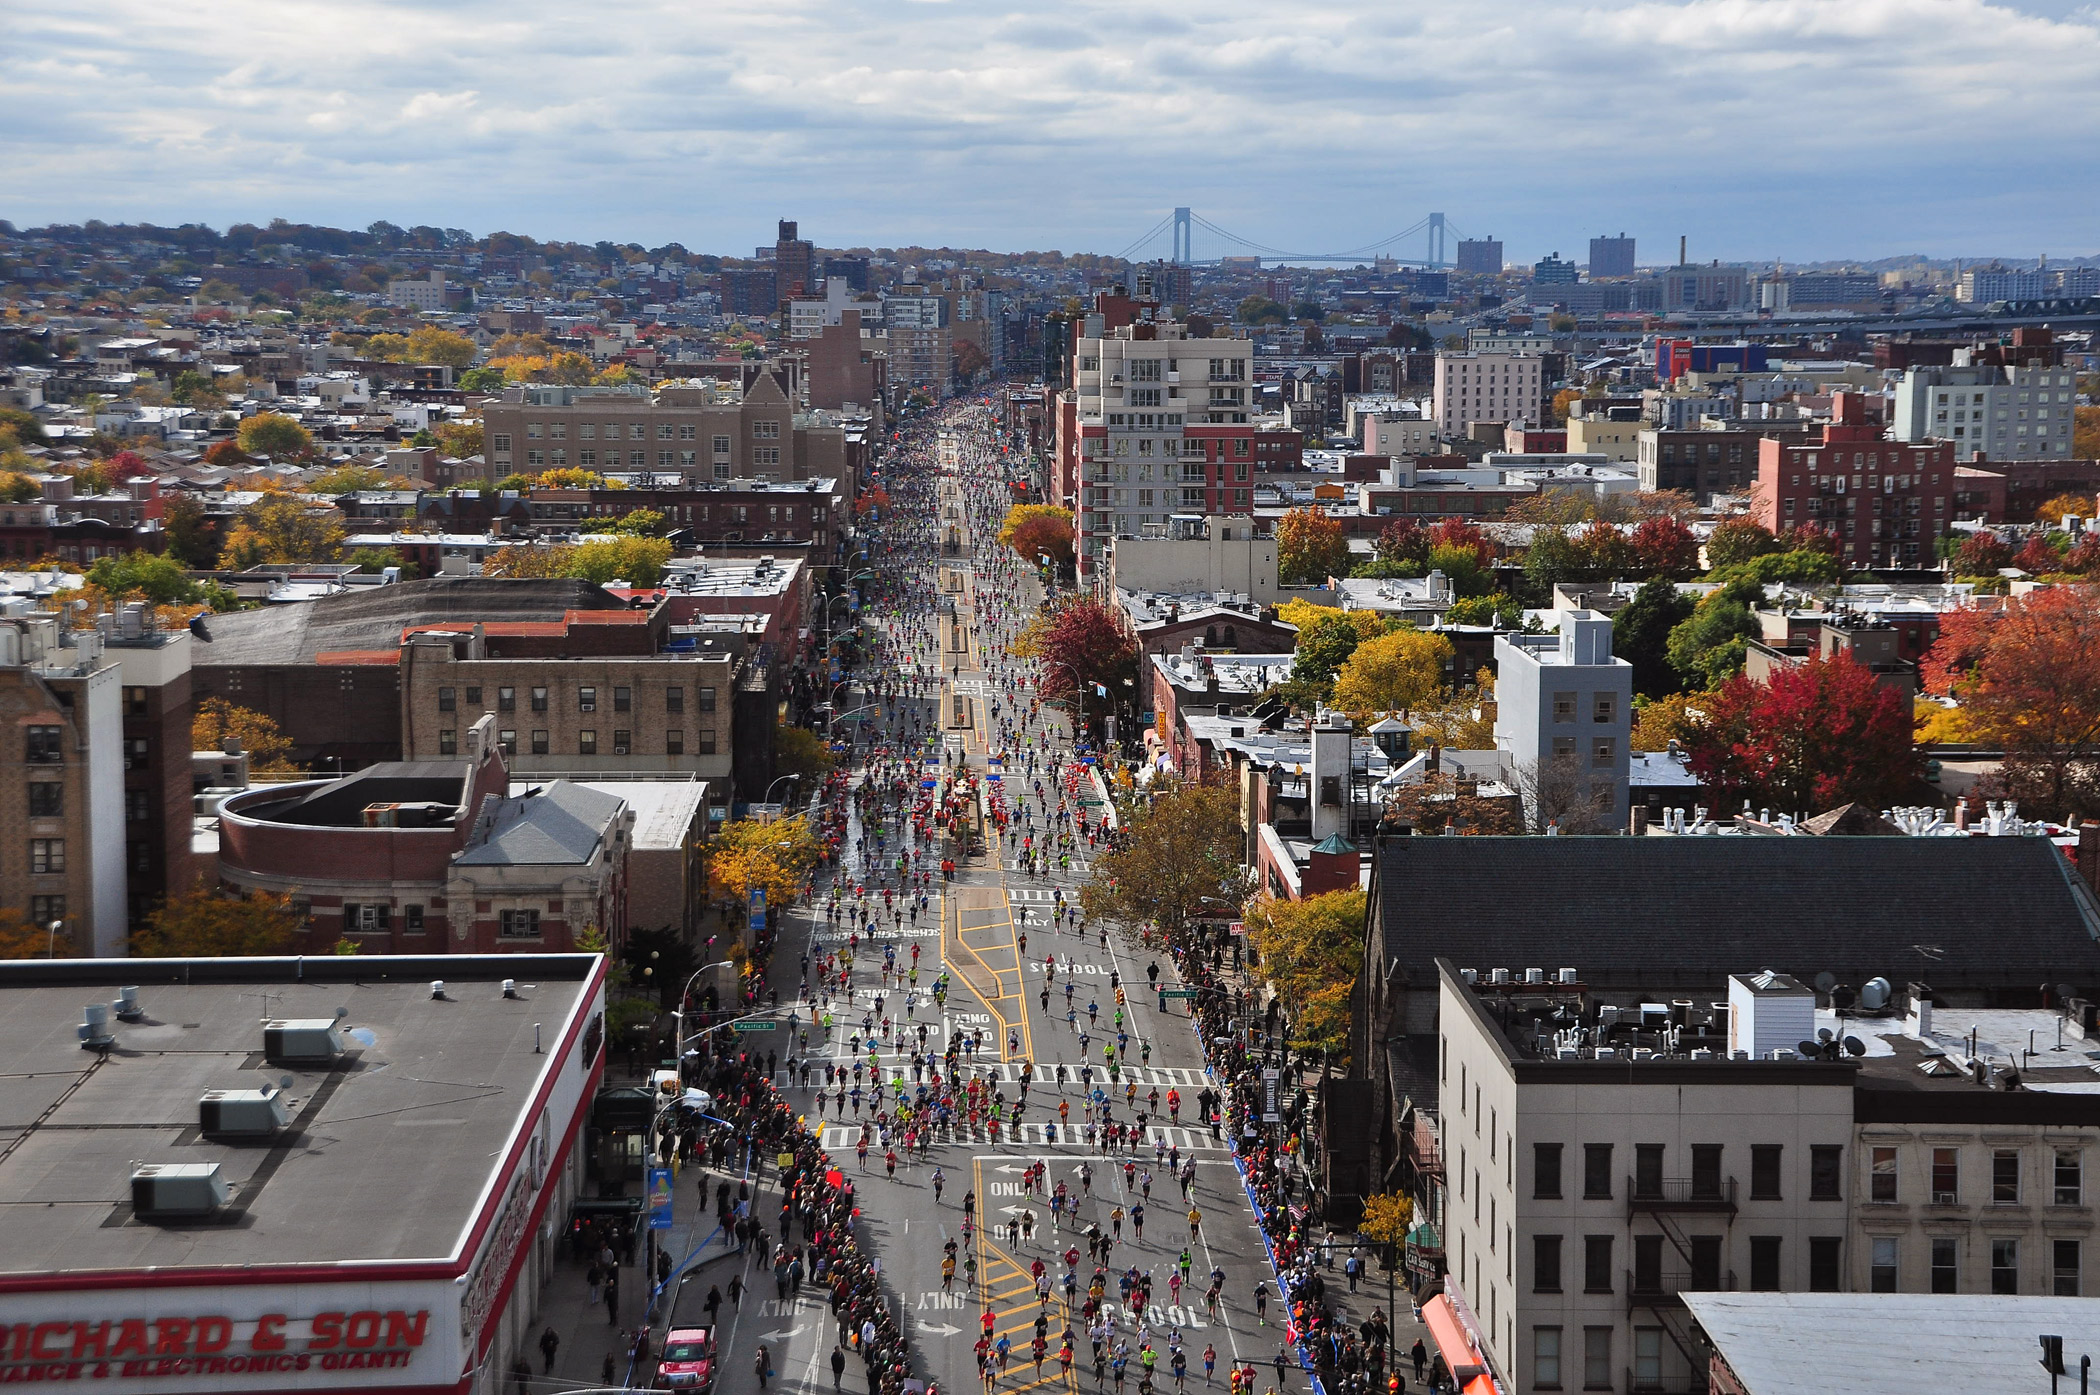 A view of competitors in the 2013 New York City Marathon from 4th Avenue in New York's Brooklyn borough.